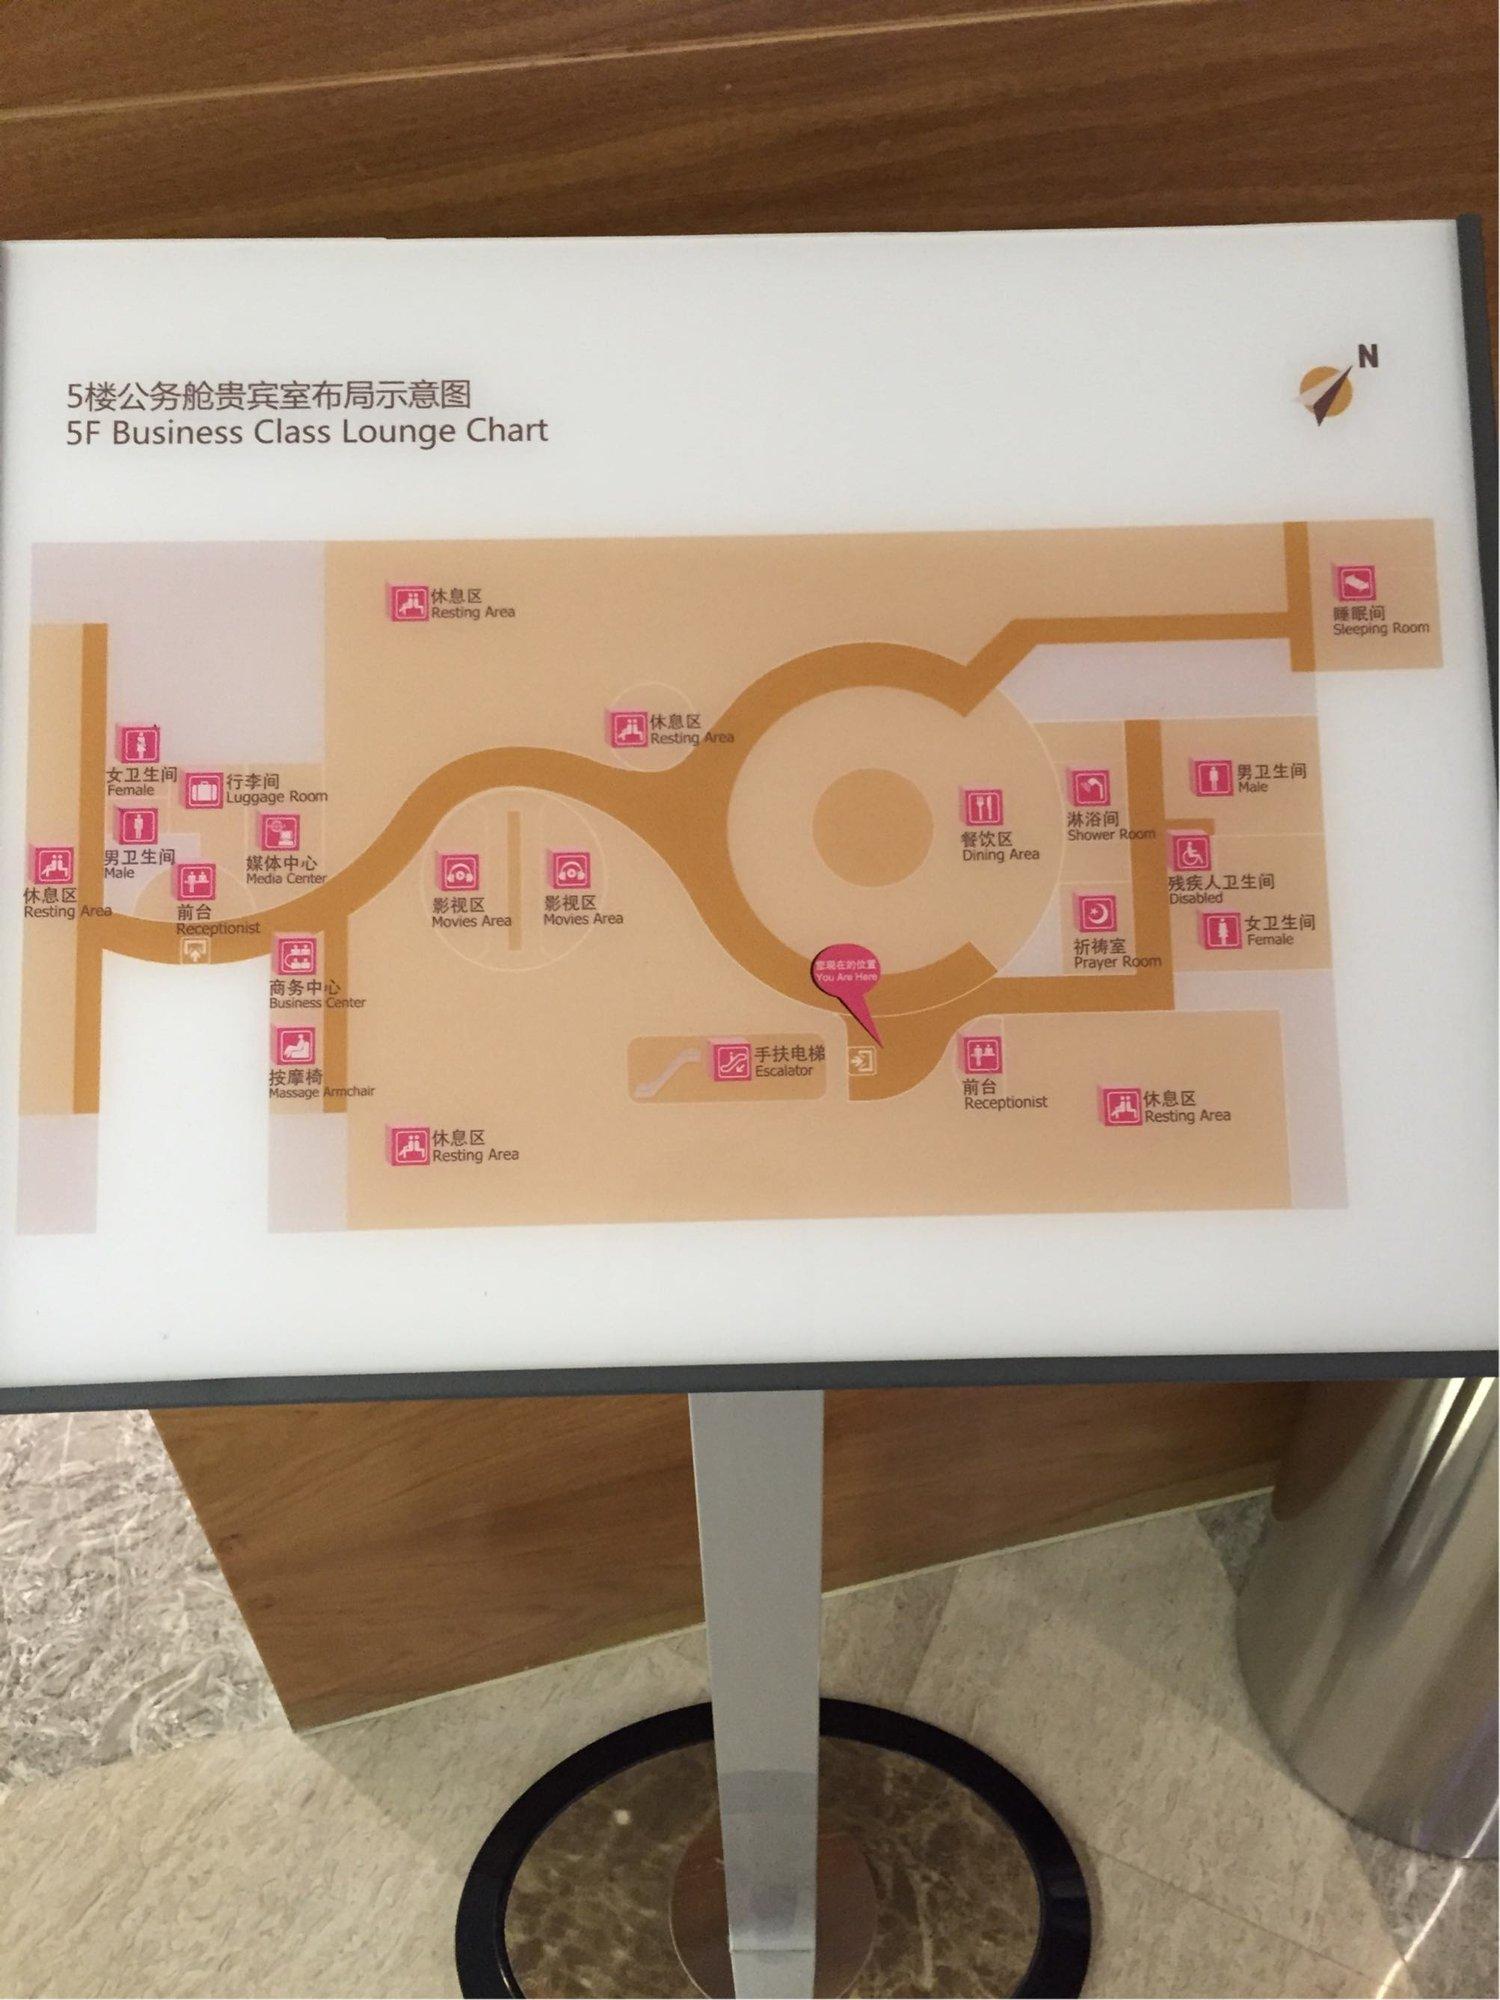 No. 71 Air China Business Class Lounge image 8 of 9